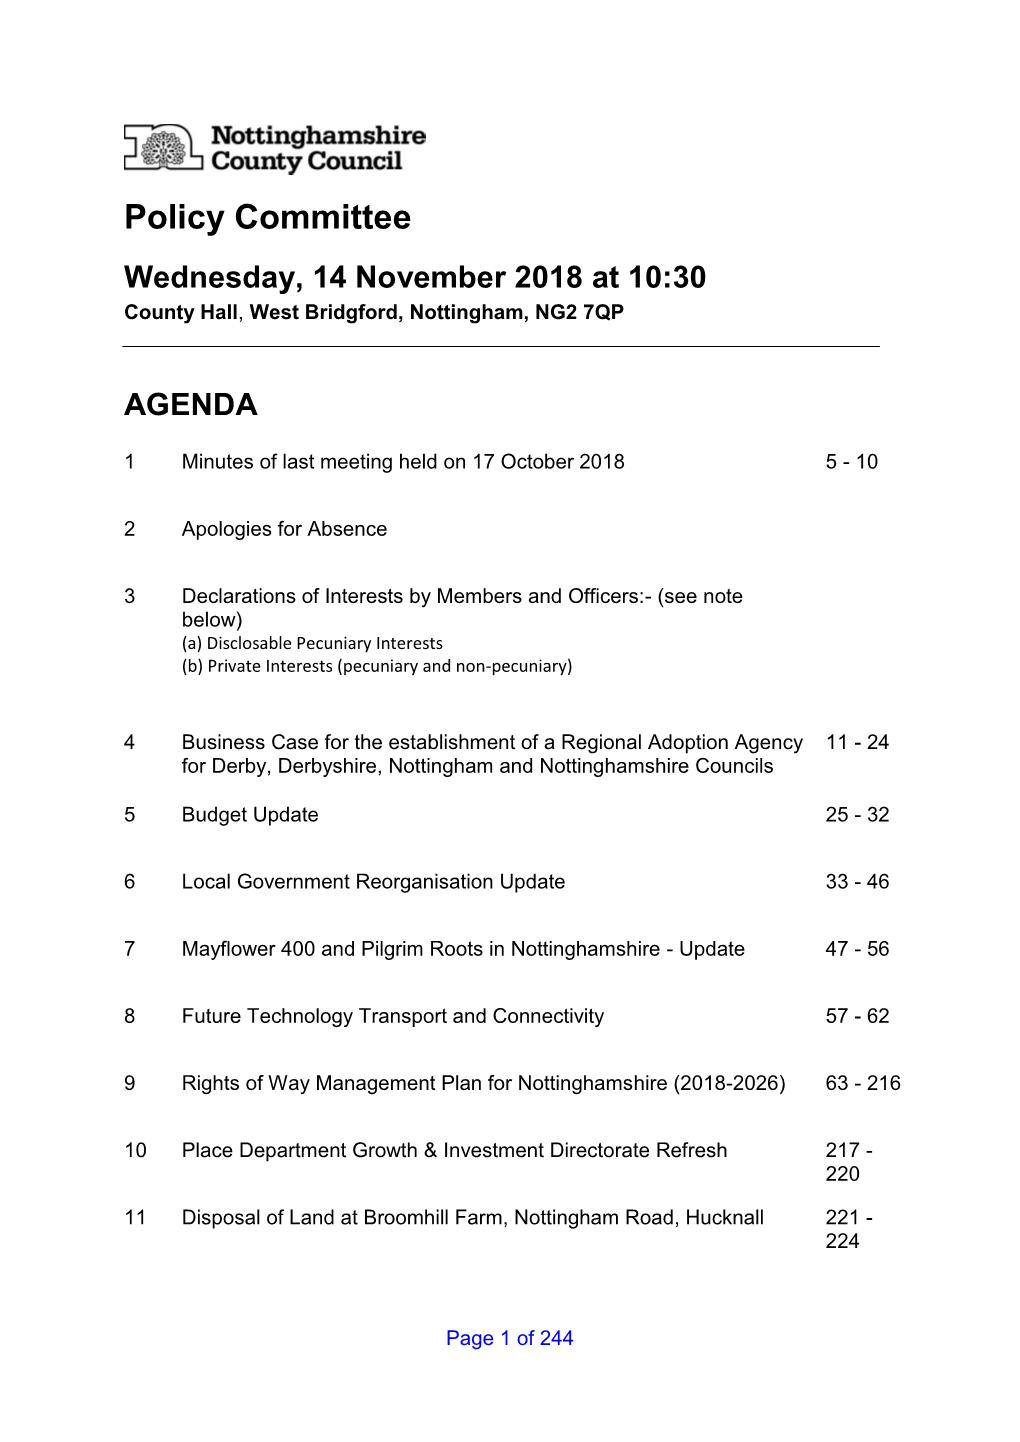 Policy Committee Wednesday, 14 November 2018 at 10:30 County Hall, West Bridgford, Nottingham, NG2 7QP